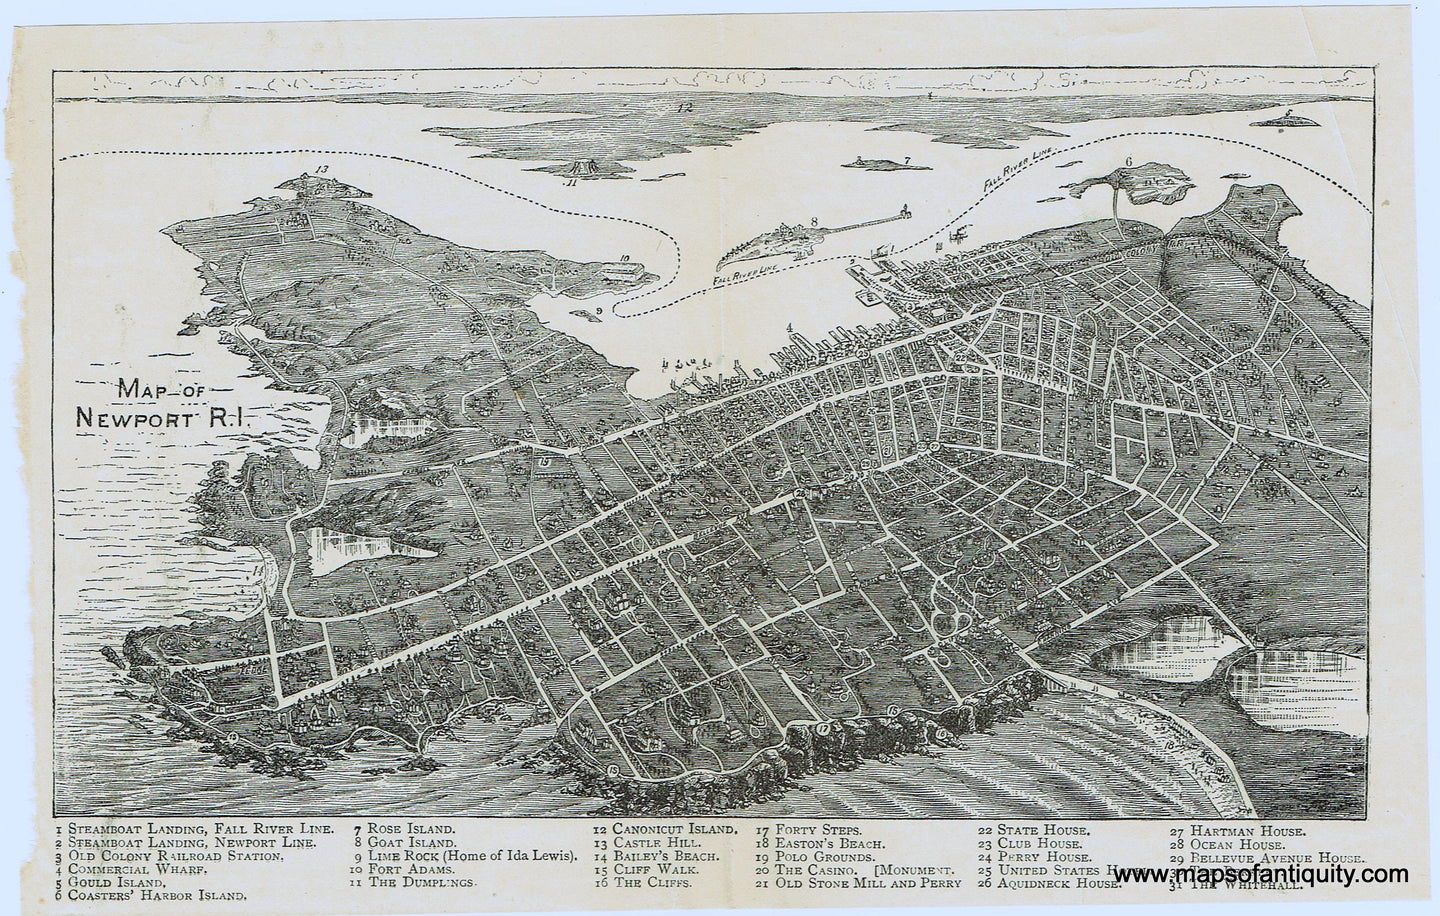 Black-and-White-Antique-Bird's-Eye-View-Map-Map-of-Newport-R.I.-United-States-Northeast-1886-Old-Colony-Railroad-Brochure-Maps-Of-Antiquity